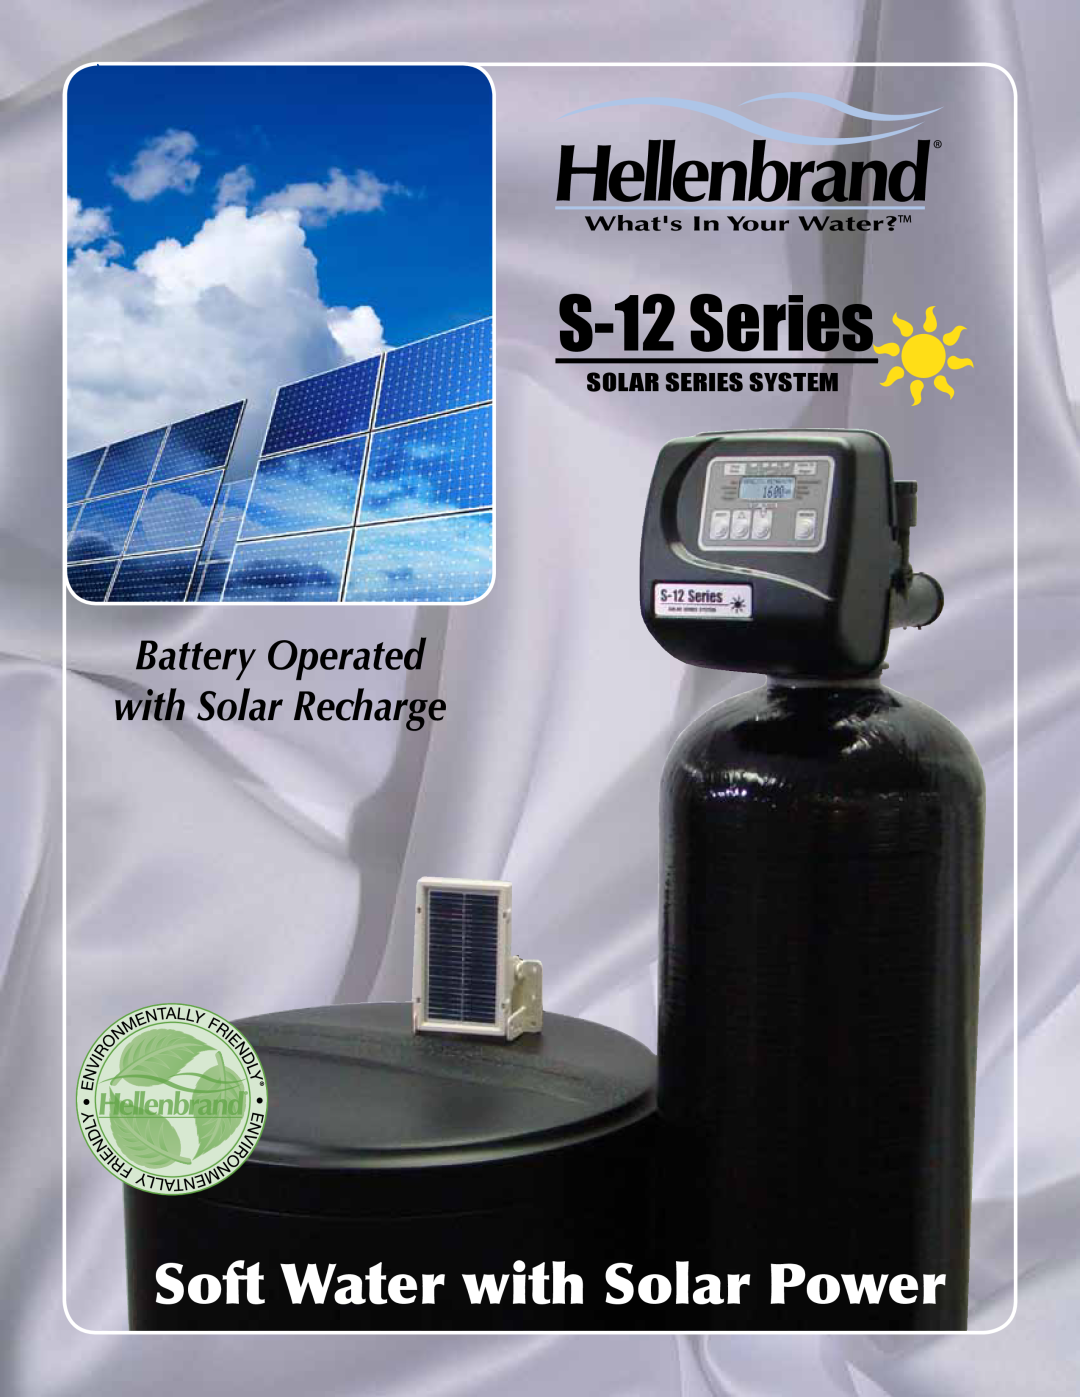 Hellenbrand S-12 SERIES manual S-12Series, Soft Water with Solar Power, Battery Operated with Solar Recharge 